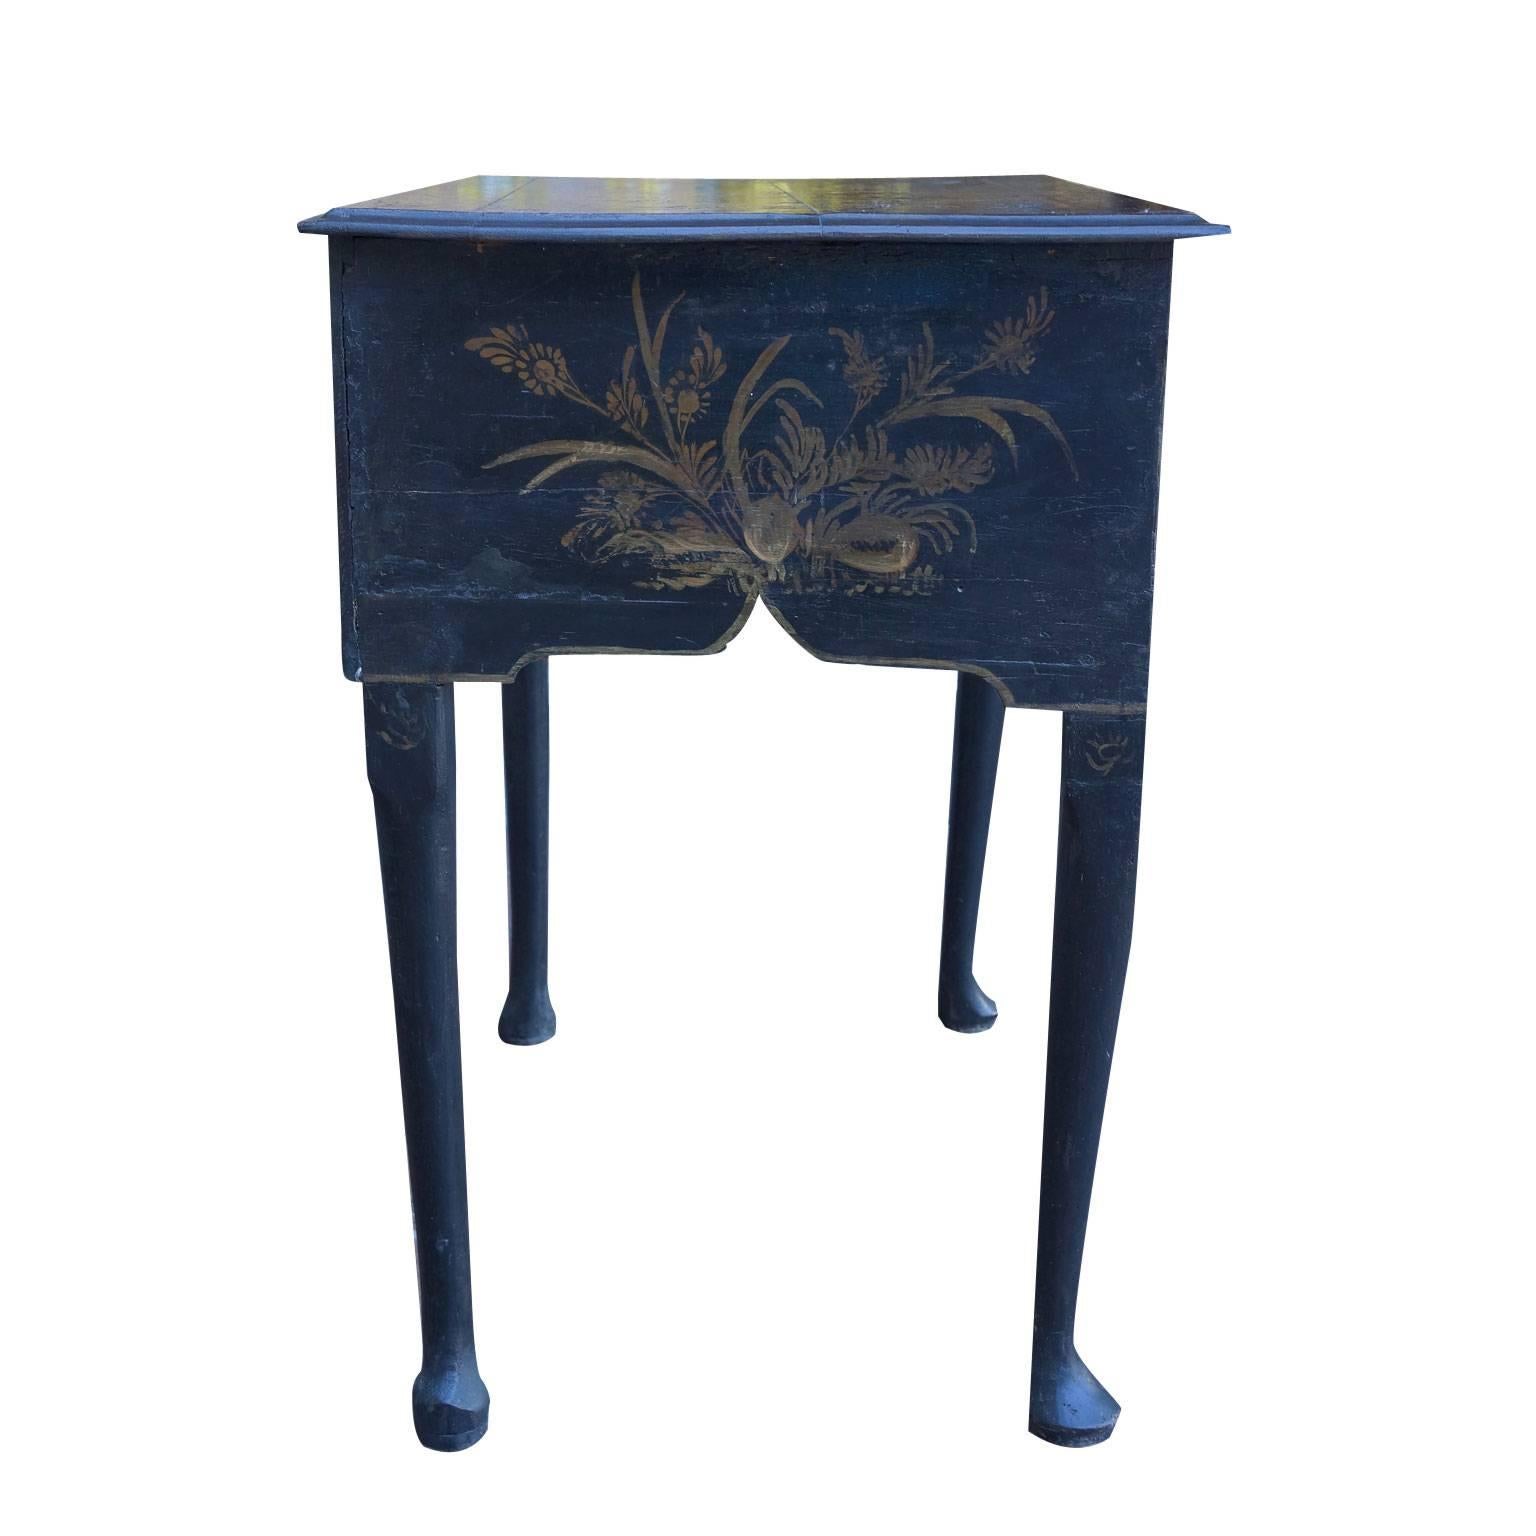 Black Lacquer Queen Anne Japanned Dressing Table, circa 1750 In Excellent Condition For Sale In Carmel, CA